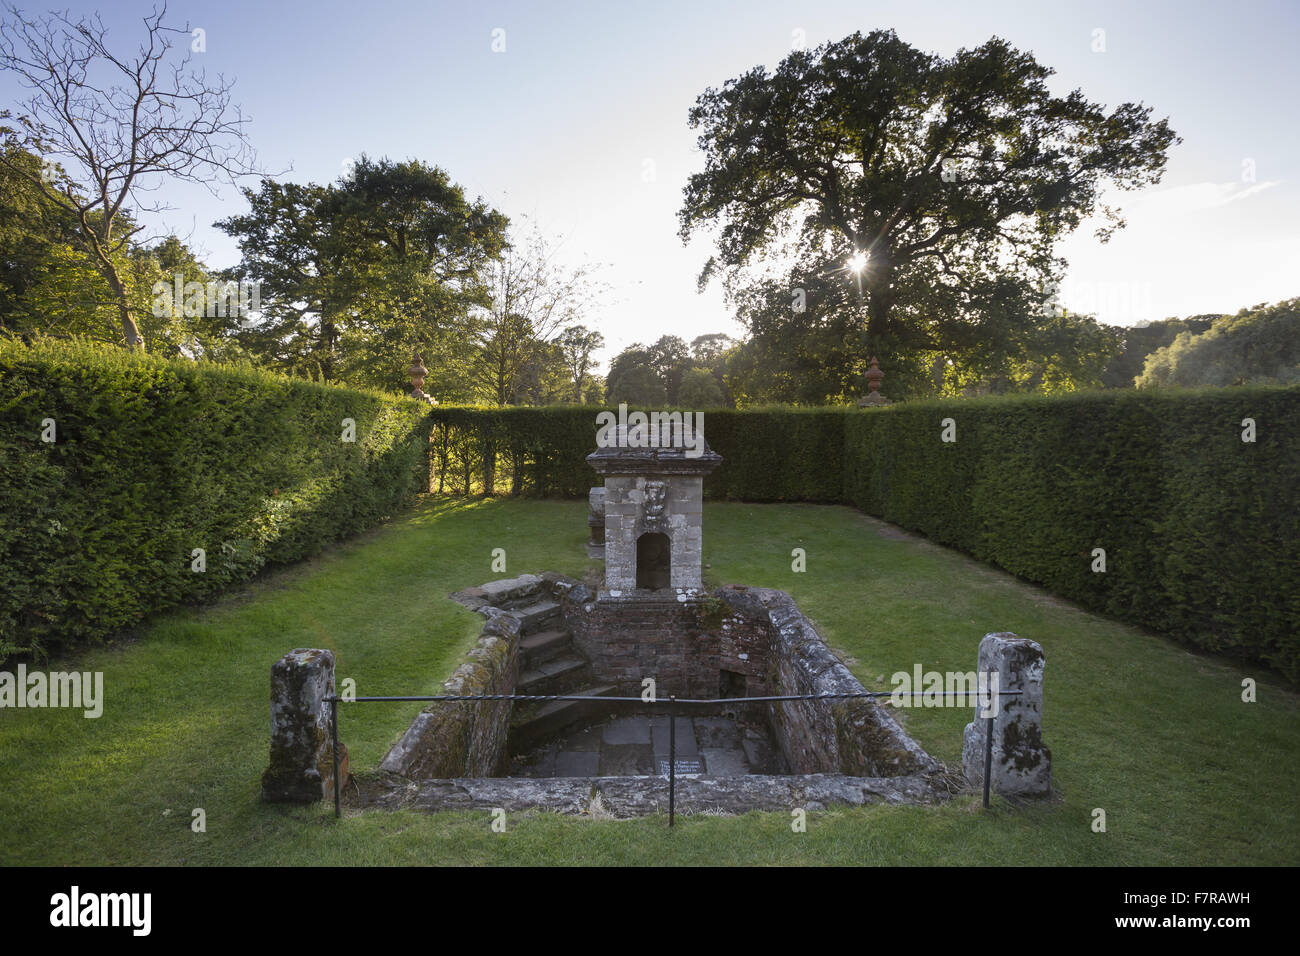 The 'Roman' plunge pool at Packwood House, created in 1670, Warwickshire. Packwood House's origins lie in the 16th century, but it was extensively restored in the 1920s. Stock Photo